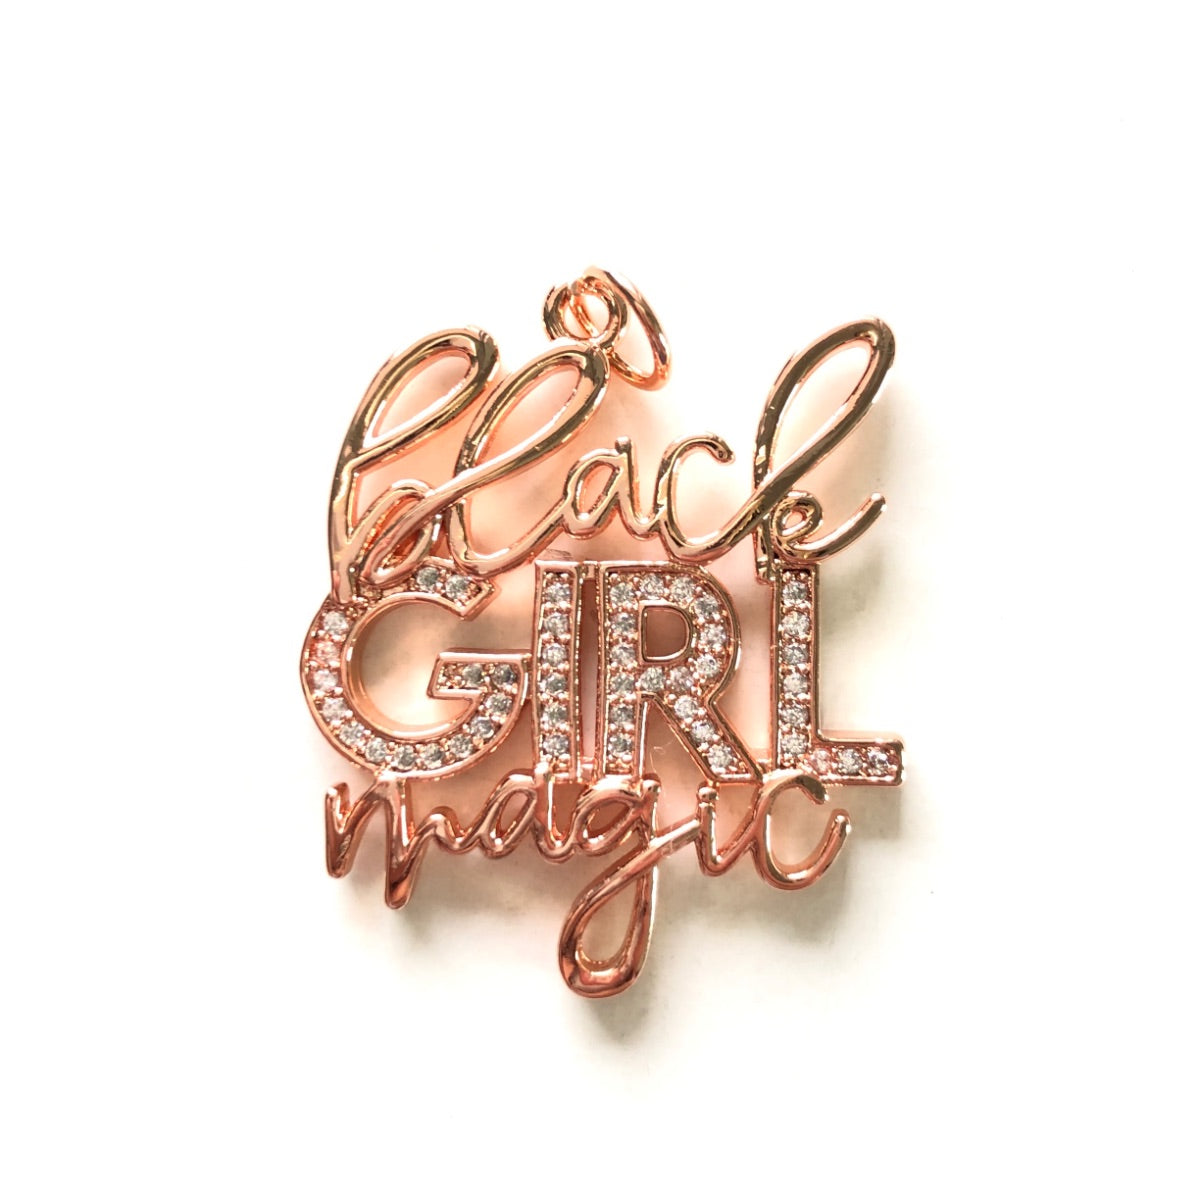 10pcs/lot CZ Paved Black Girl Magic Charms Rose Gold CZ Paved Charms New Charms Arrivals Words & Quotes Charms Beads Beyond